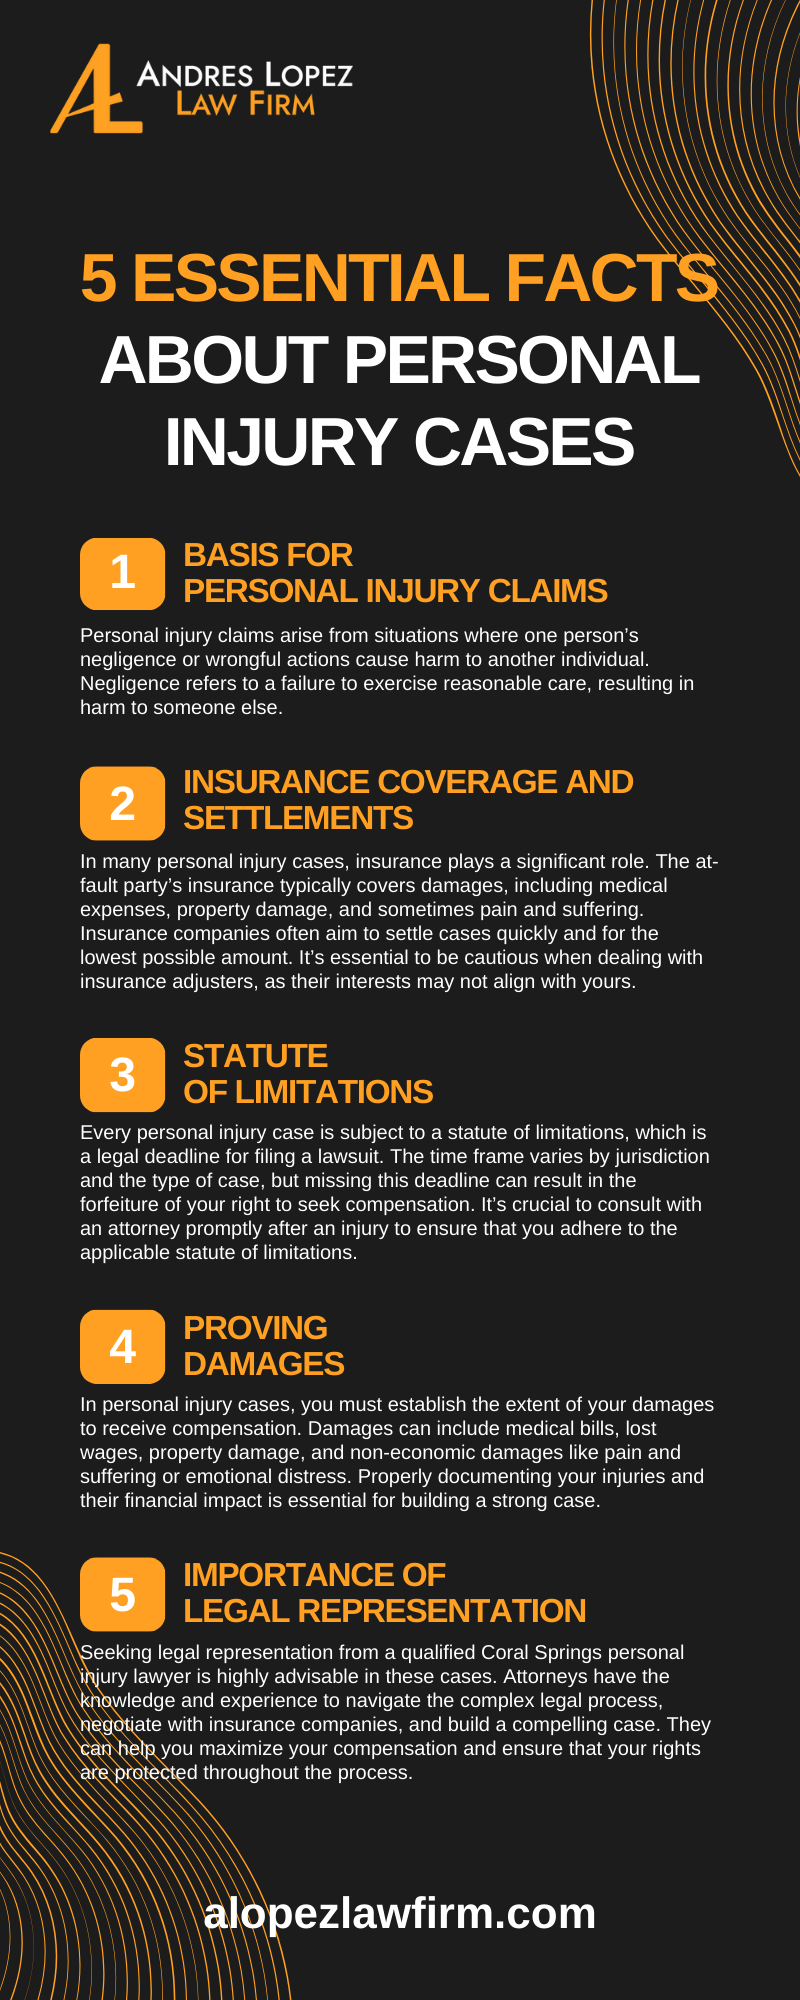 5 Essential Facts About Personal Injury Cases Infographic